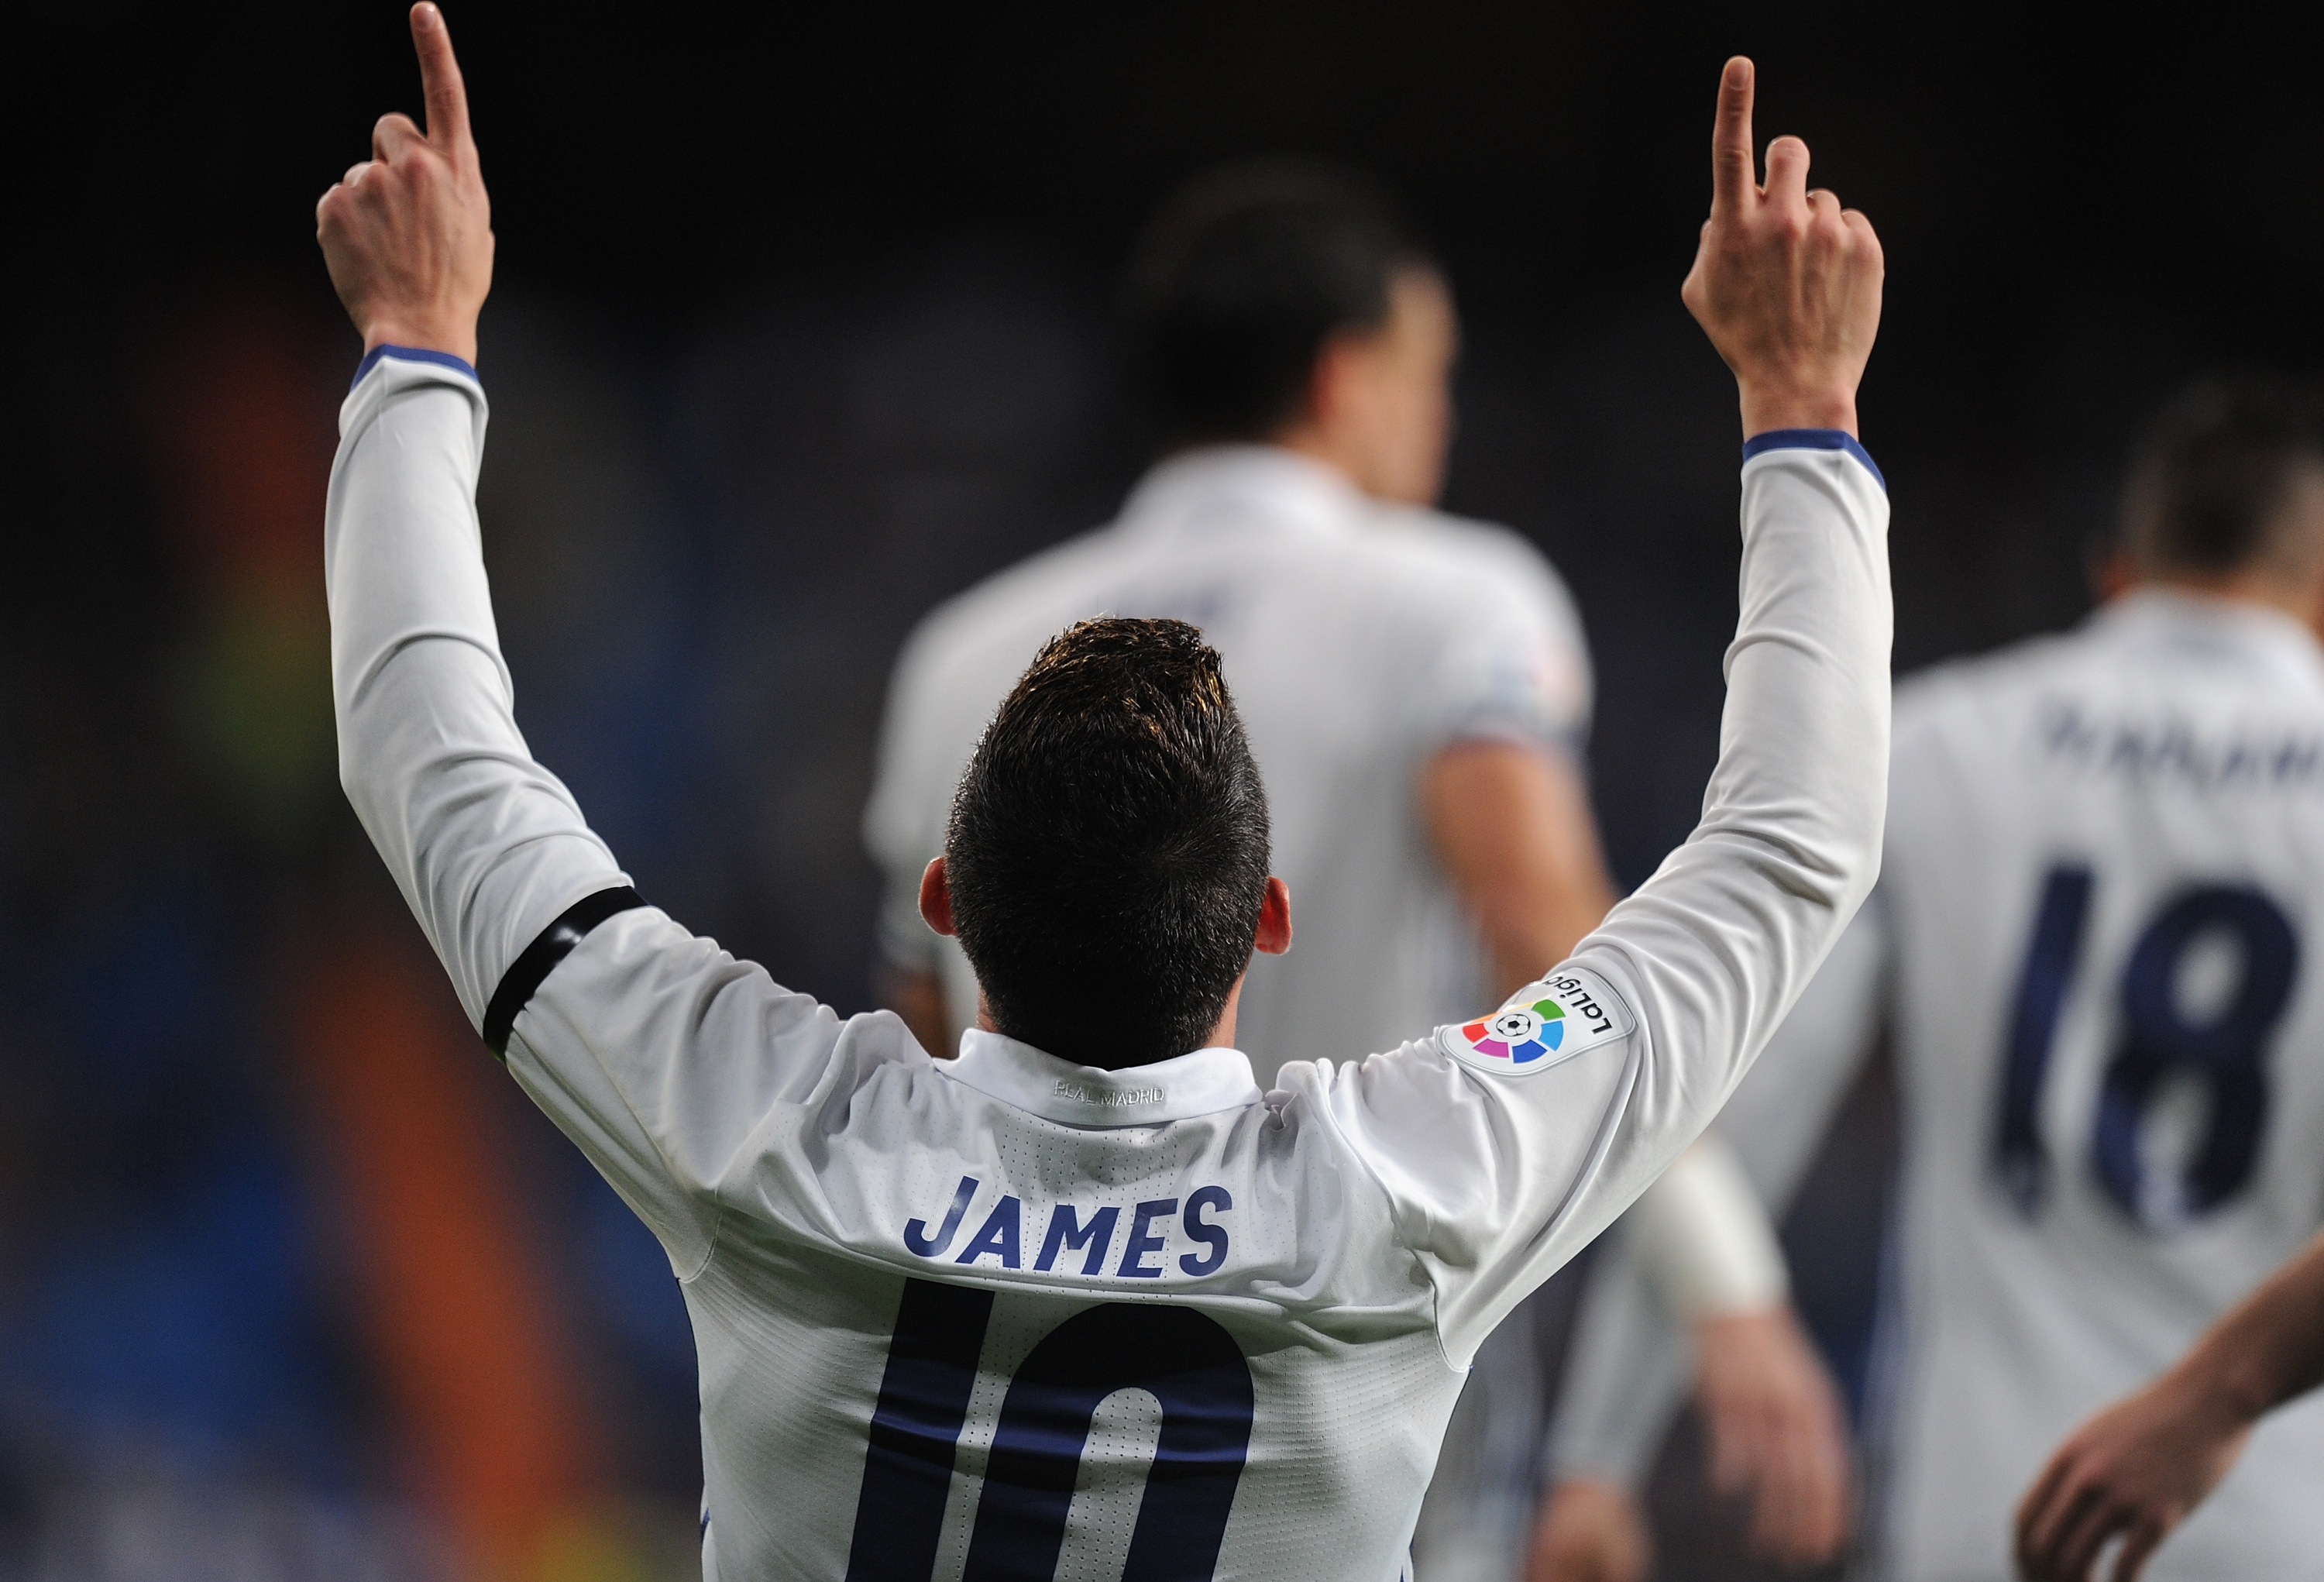 MADRID, SPAIN - NOVEMBER 30:  James Rodriguez of Real Madrid celebrates after scorinf Real's 2nd goal during the Copa del Rey last of 32 match between Real Madrid and Cultural Leonesa at estadio Santiago Bernabeu on November 30, 2016 in Madrid, Spain.  (Photo by Denis Doyle/Getty Images)